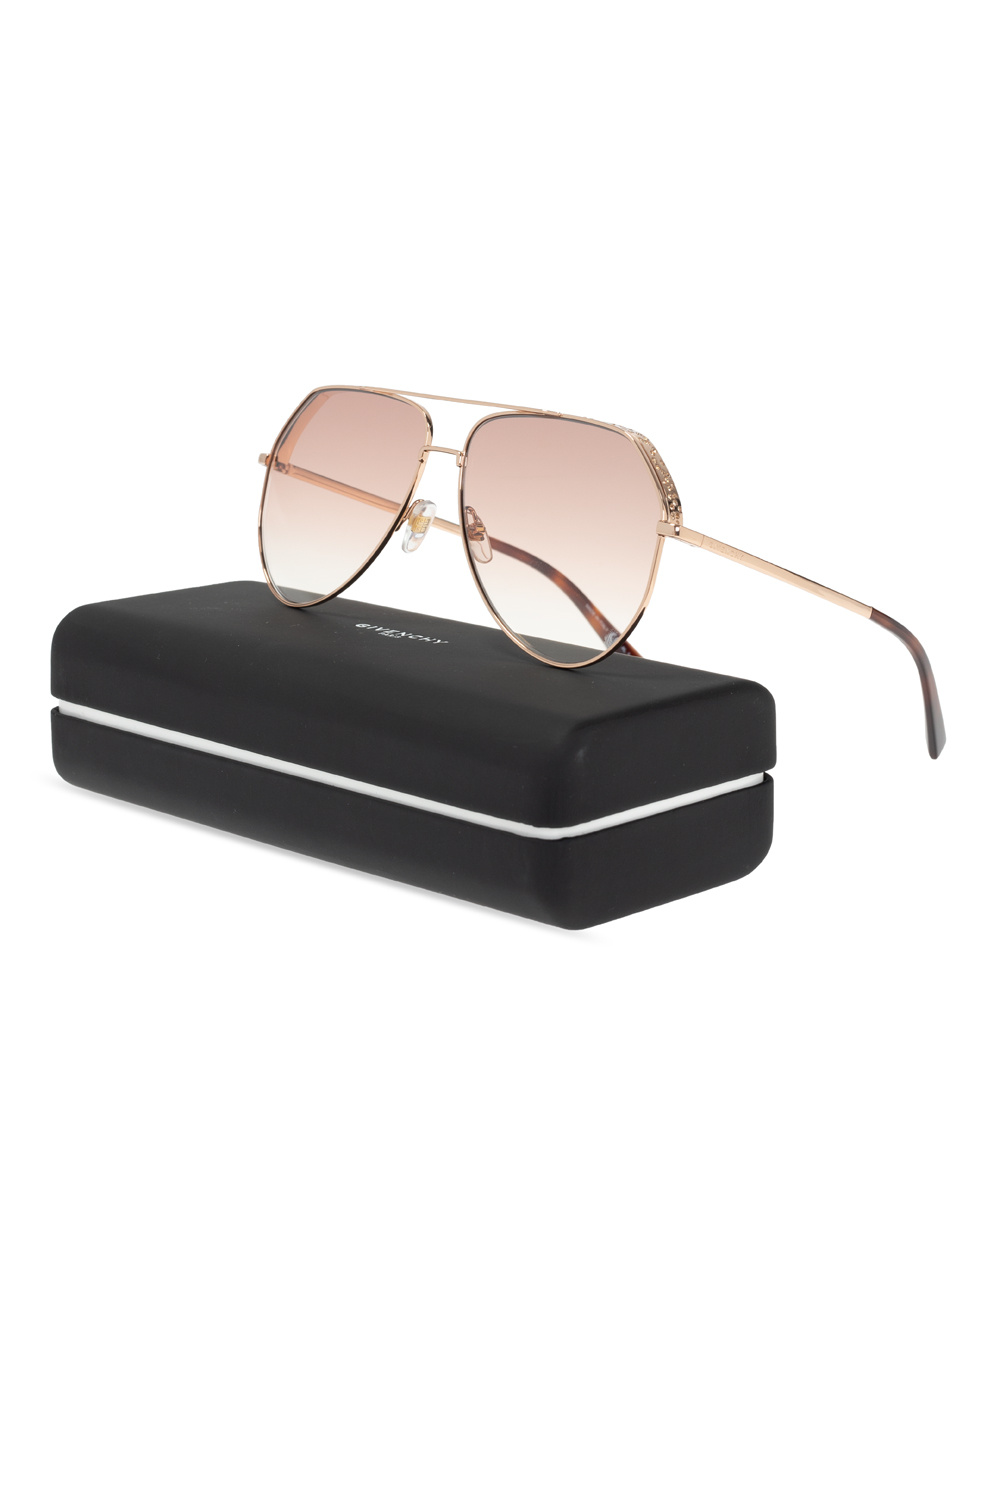 Givenchy Crystal-encrusted xl_sunglasses_accessories_polished sunglasses